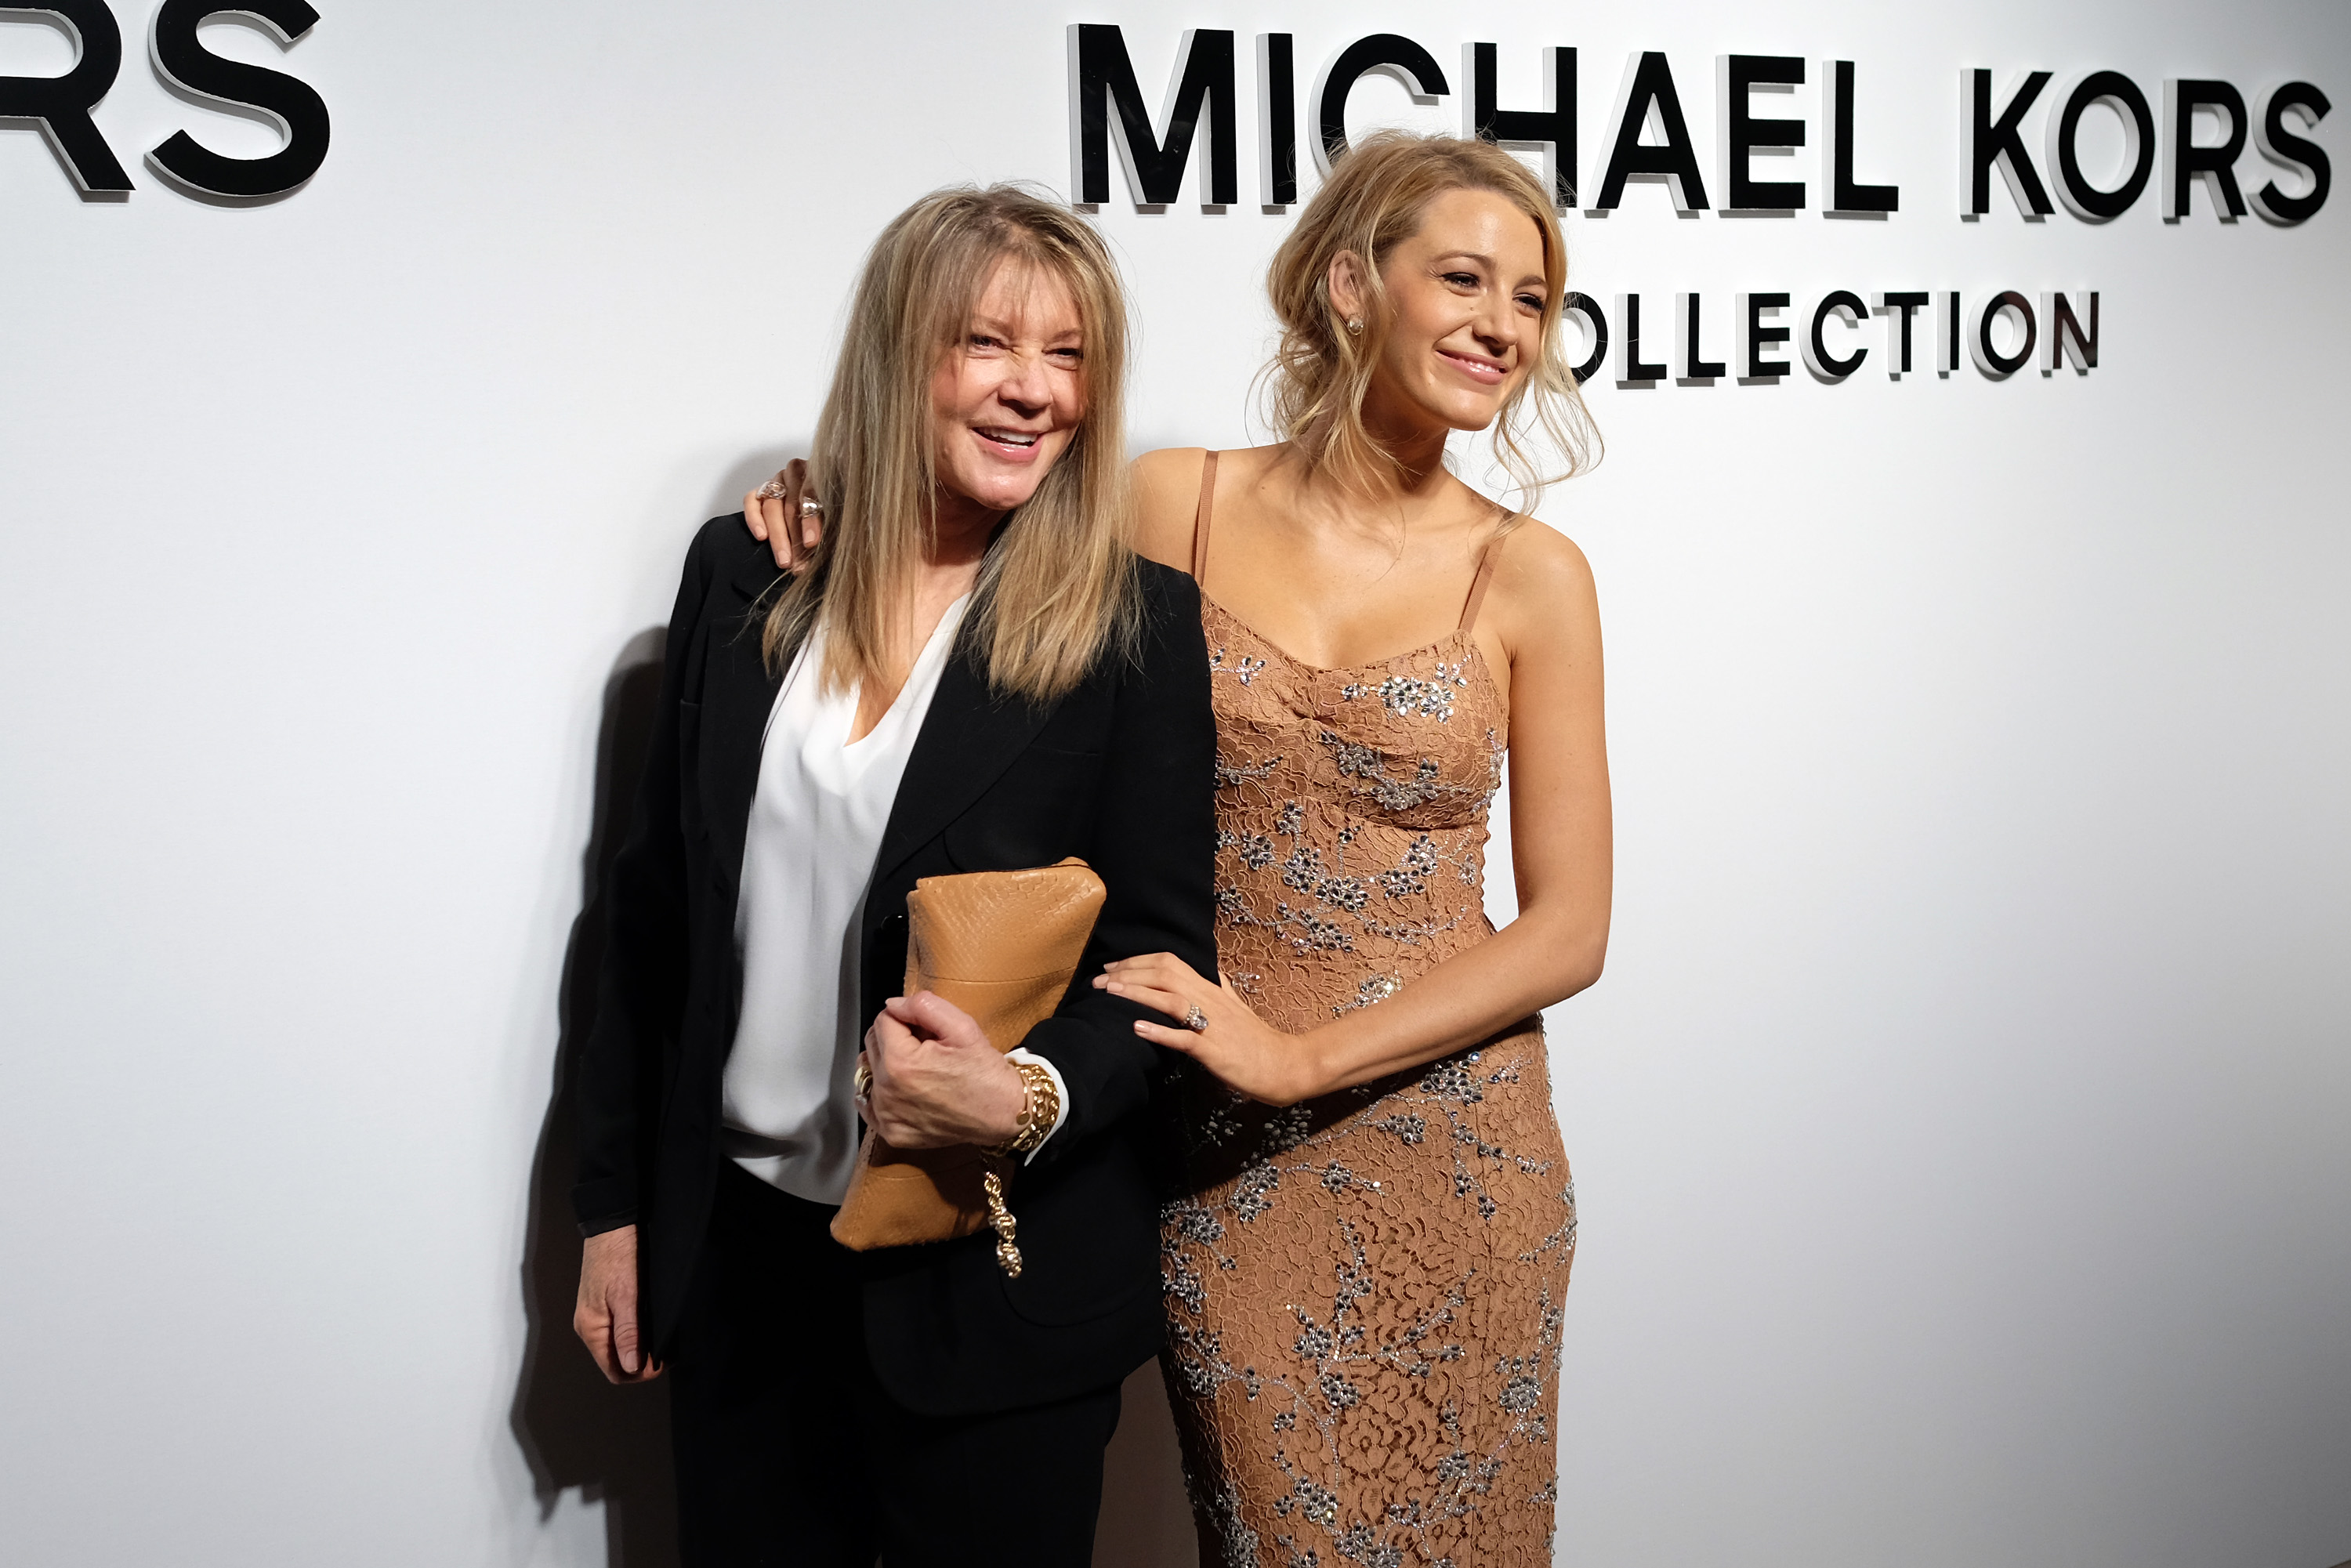 Elaine Lively and Blake Lively pose backstage at the Michael Kors Fall Runway Show during New York Fashion Week in New York City, on February 17, 2016. | Source: Getty images